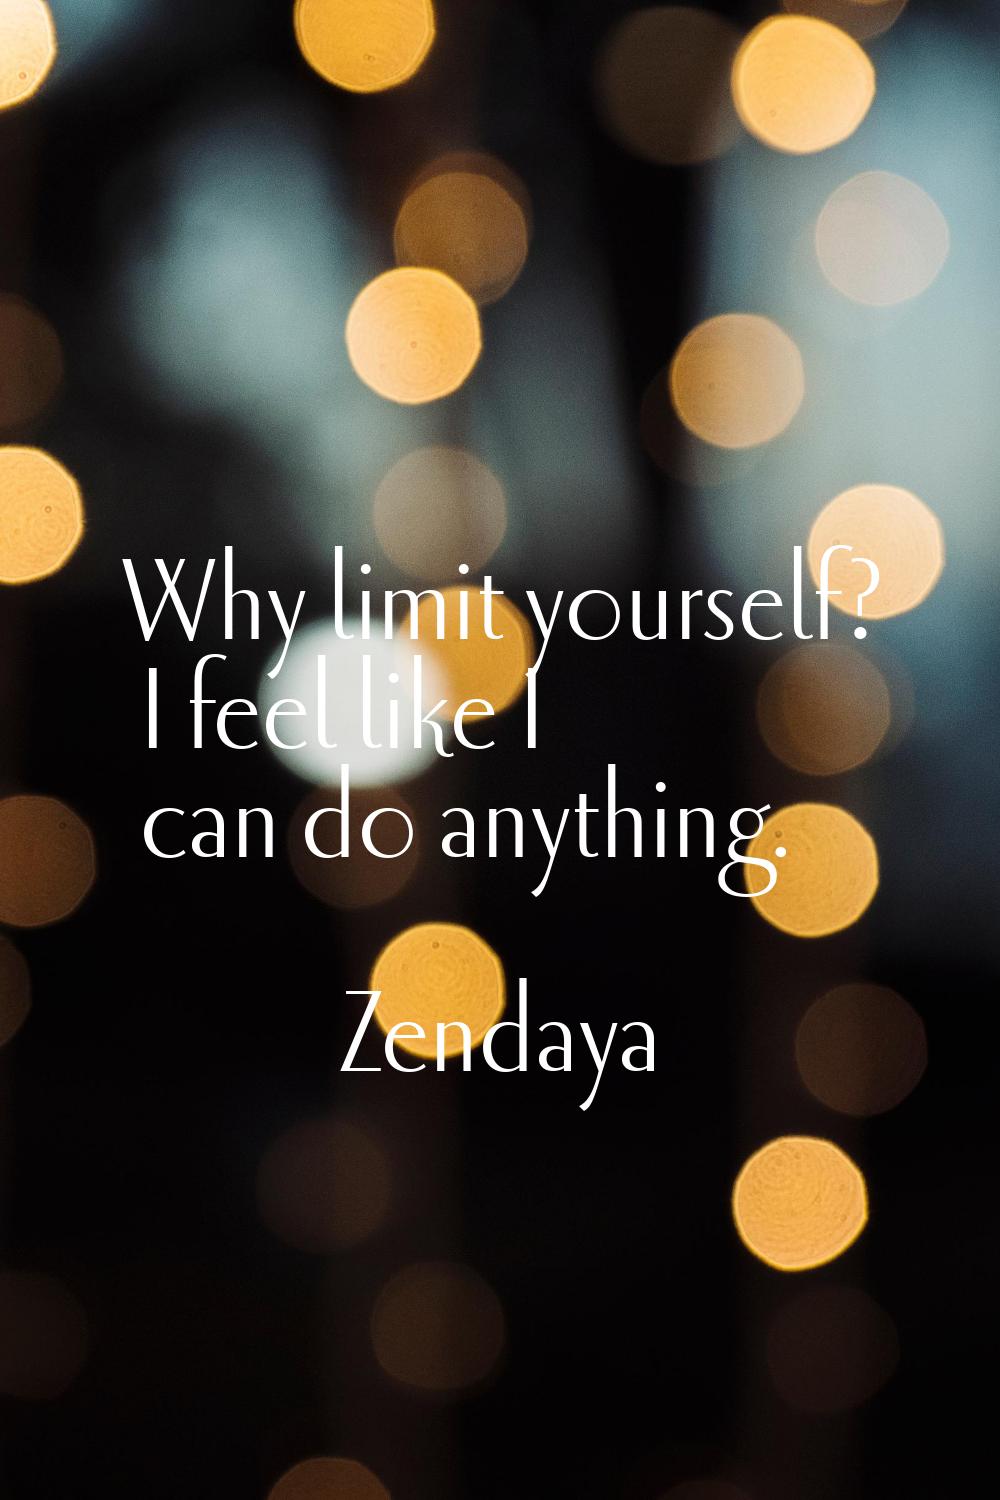 Why limit yourself? I feel like I can do anything.